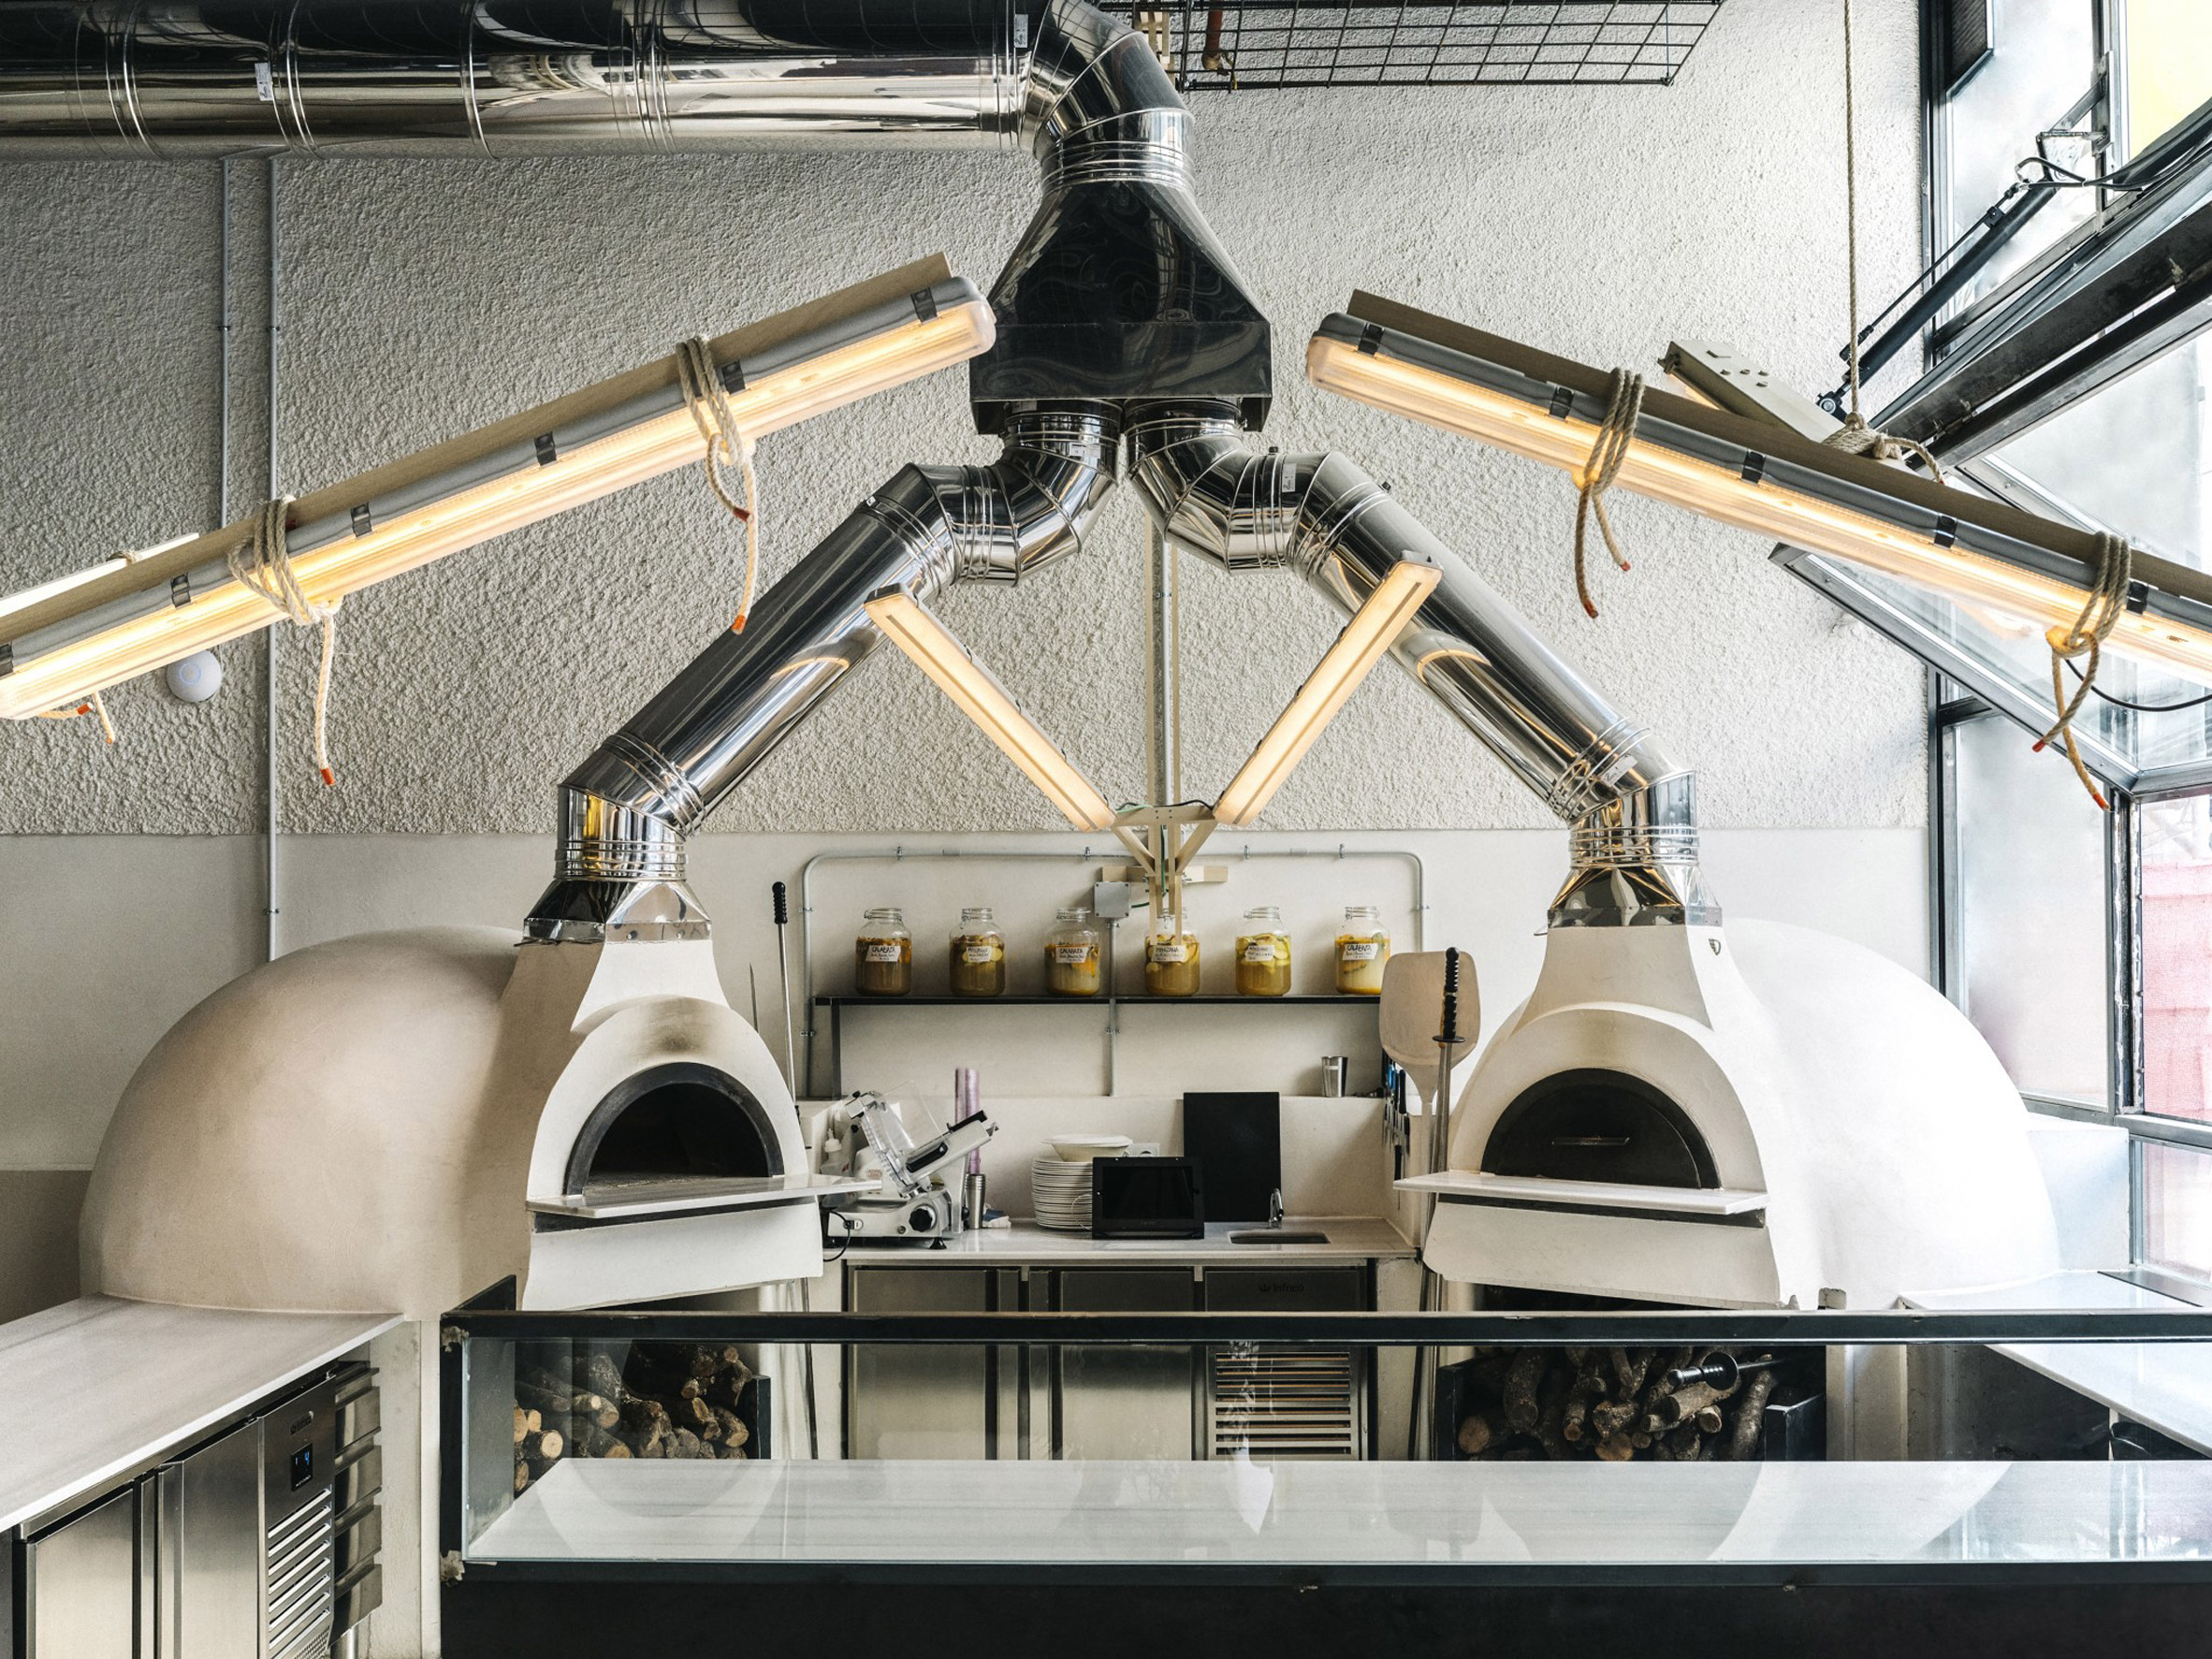 Pizza ovens in a restaurant kitchen hooked up to wiring with lighting rods overhead